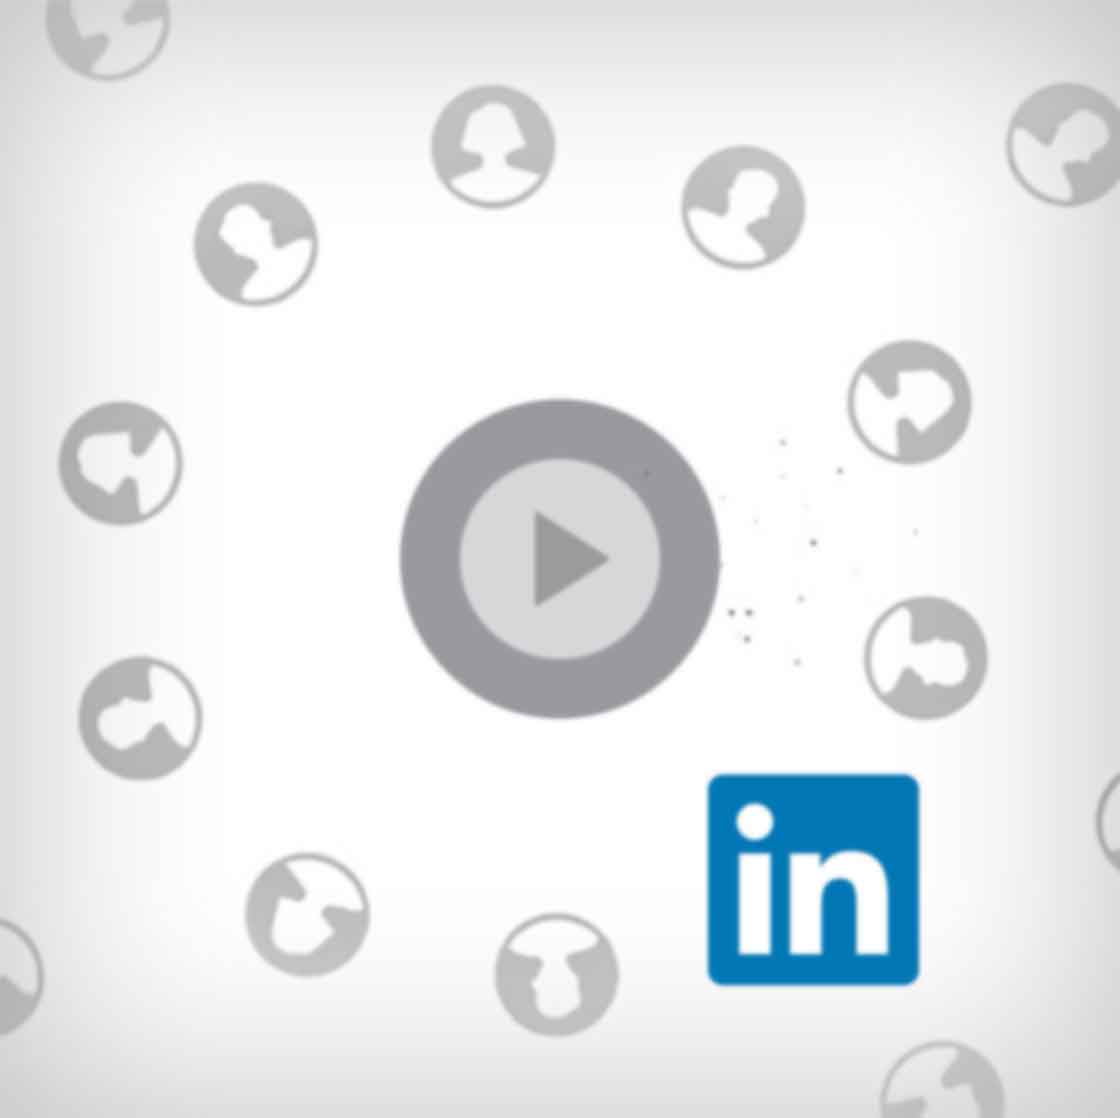 Content marketing campaigns for Linkedin